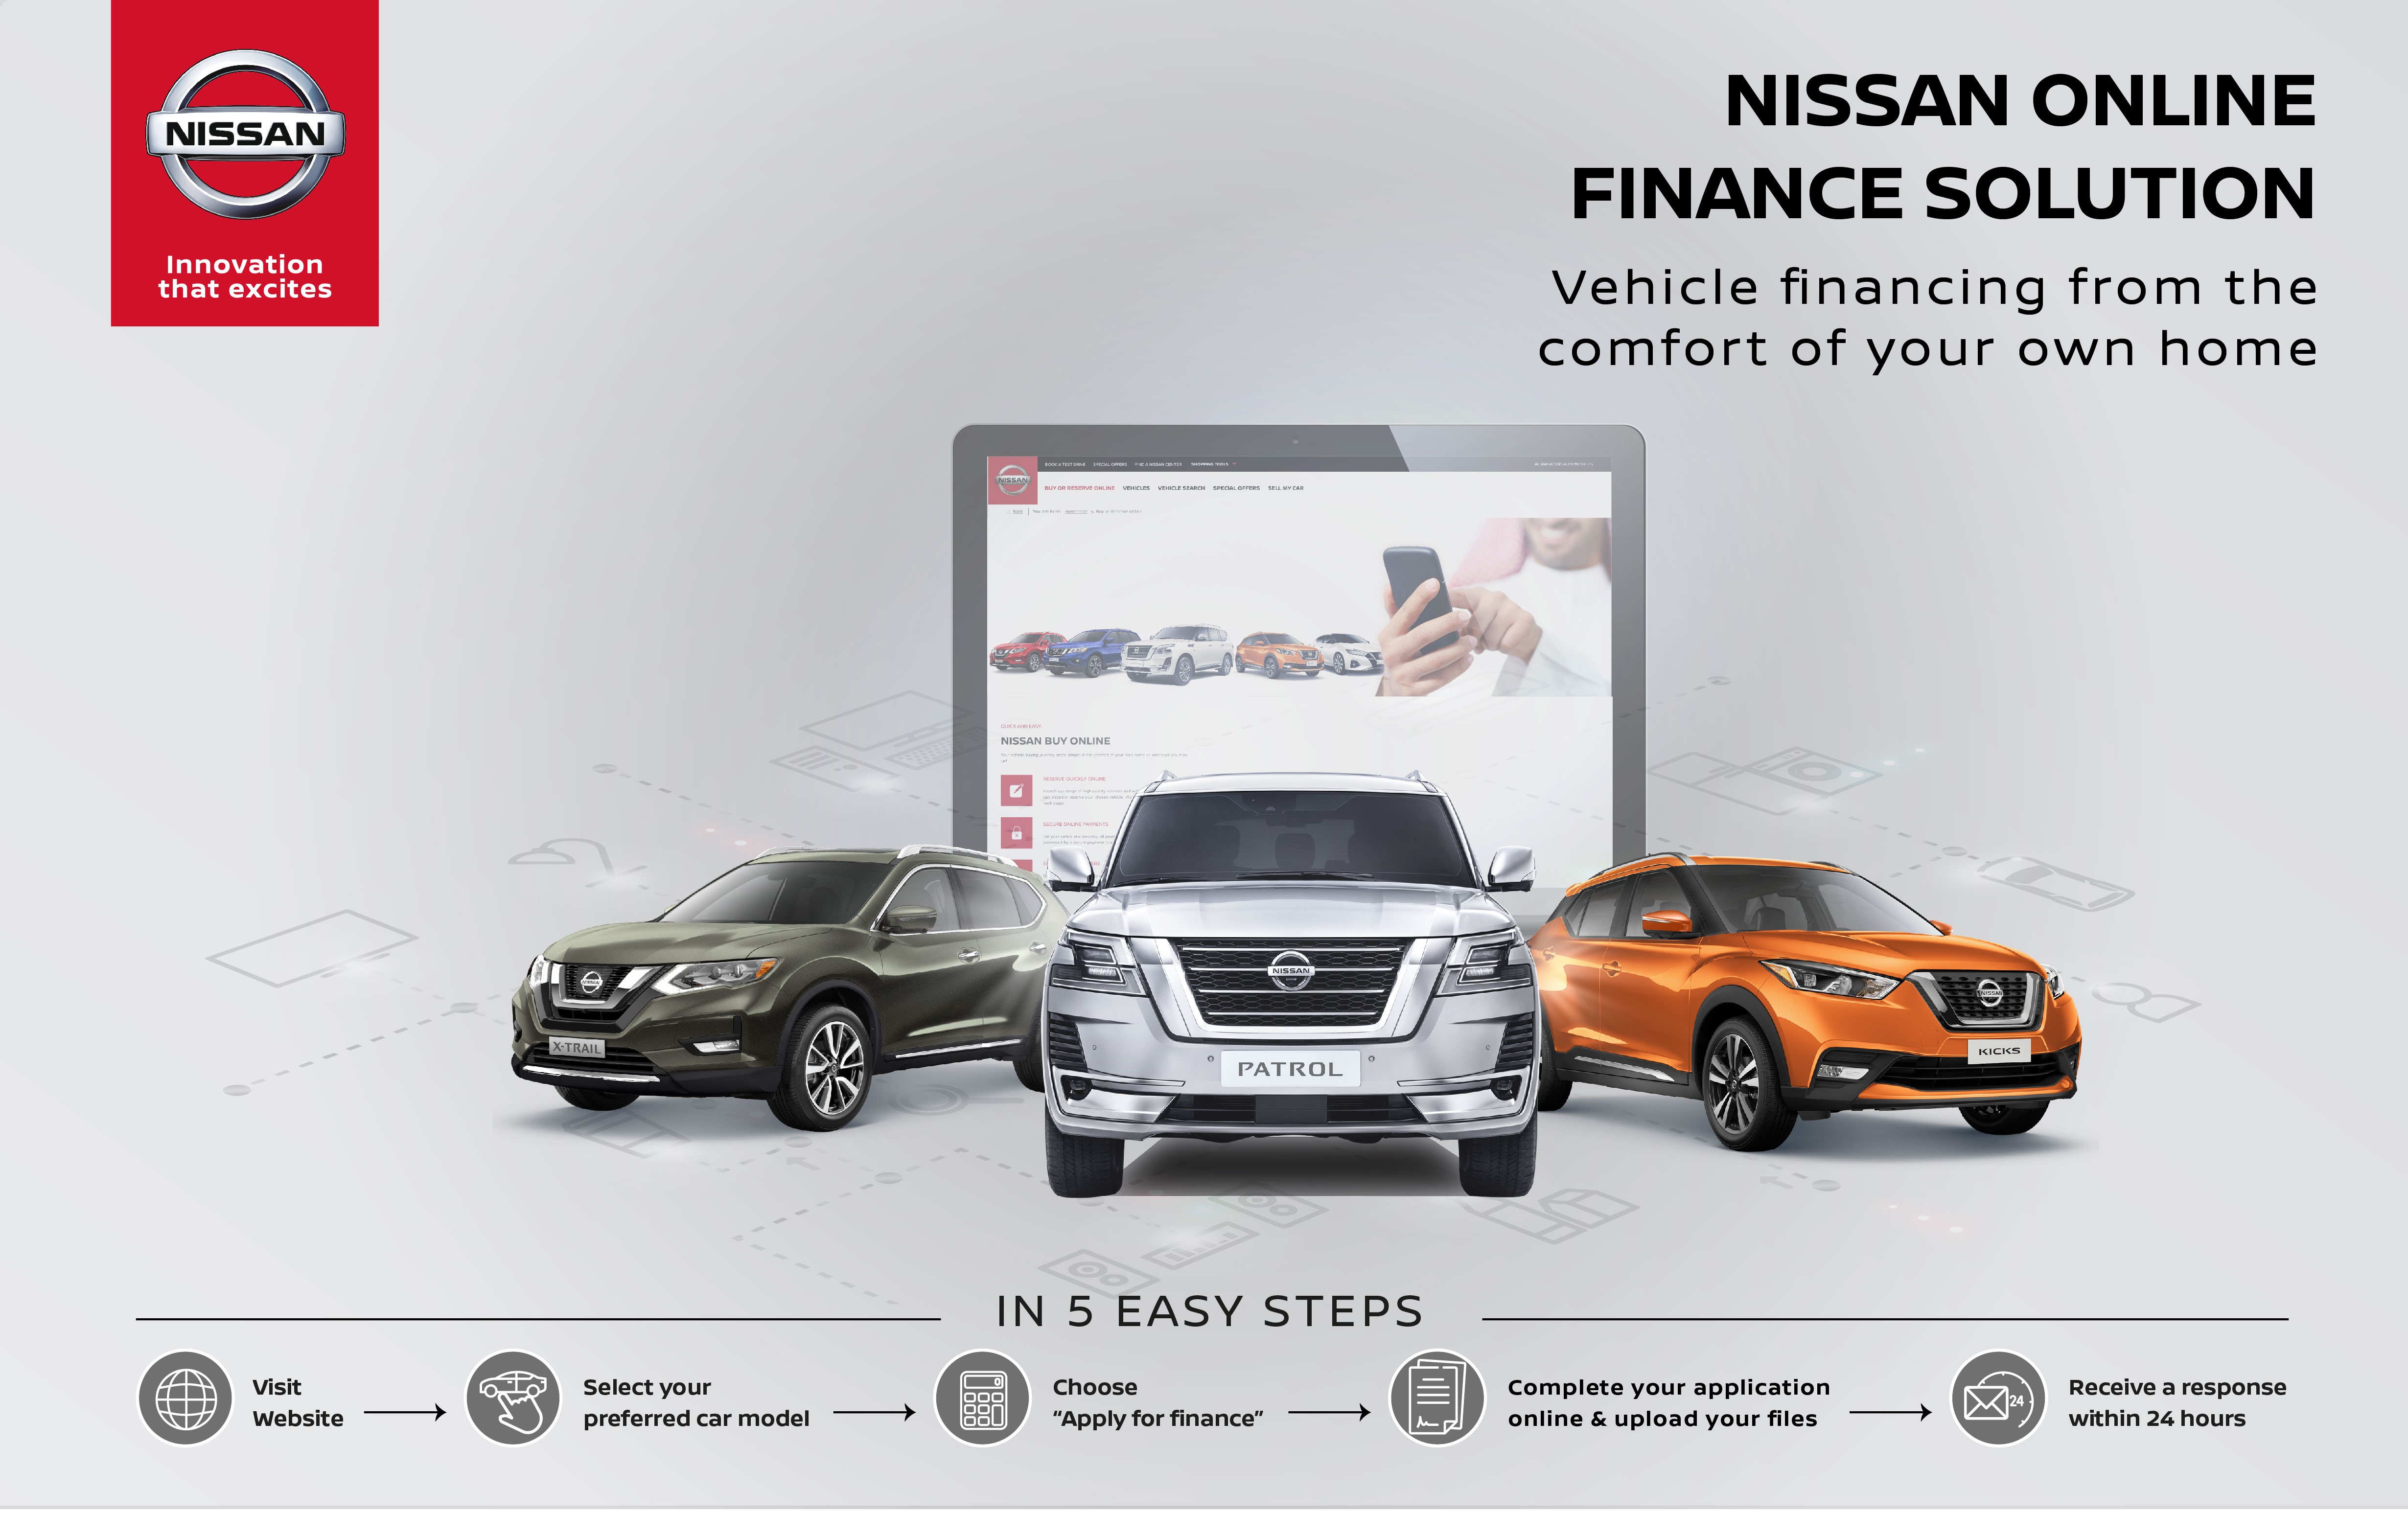 New Nissan Online Financing Solution from Al Masaood Automobiles to Accelerate Customer Journey